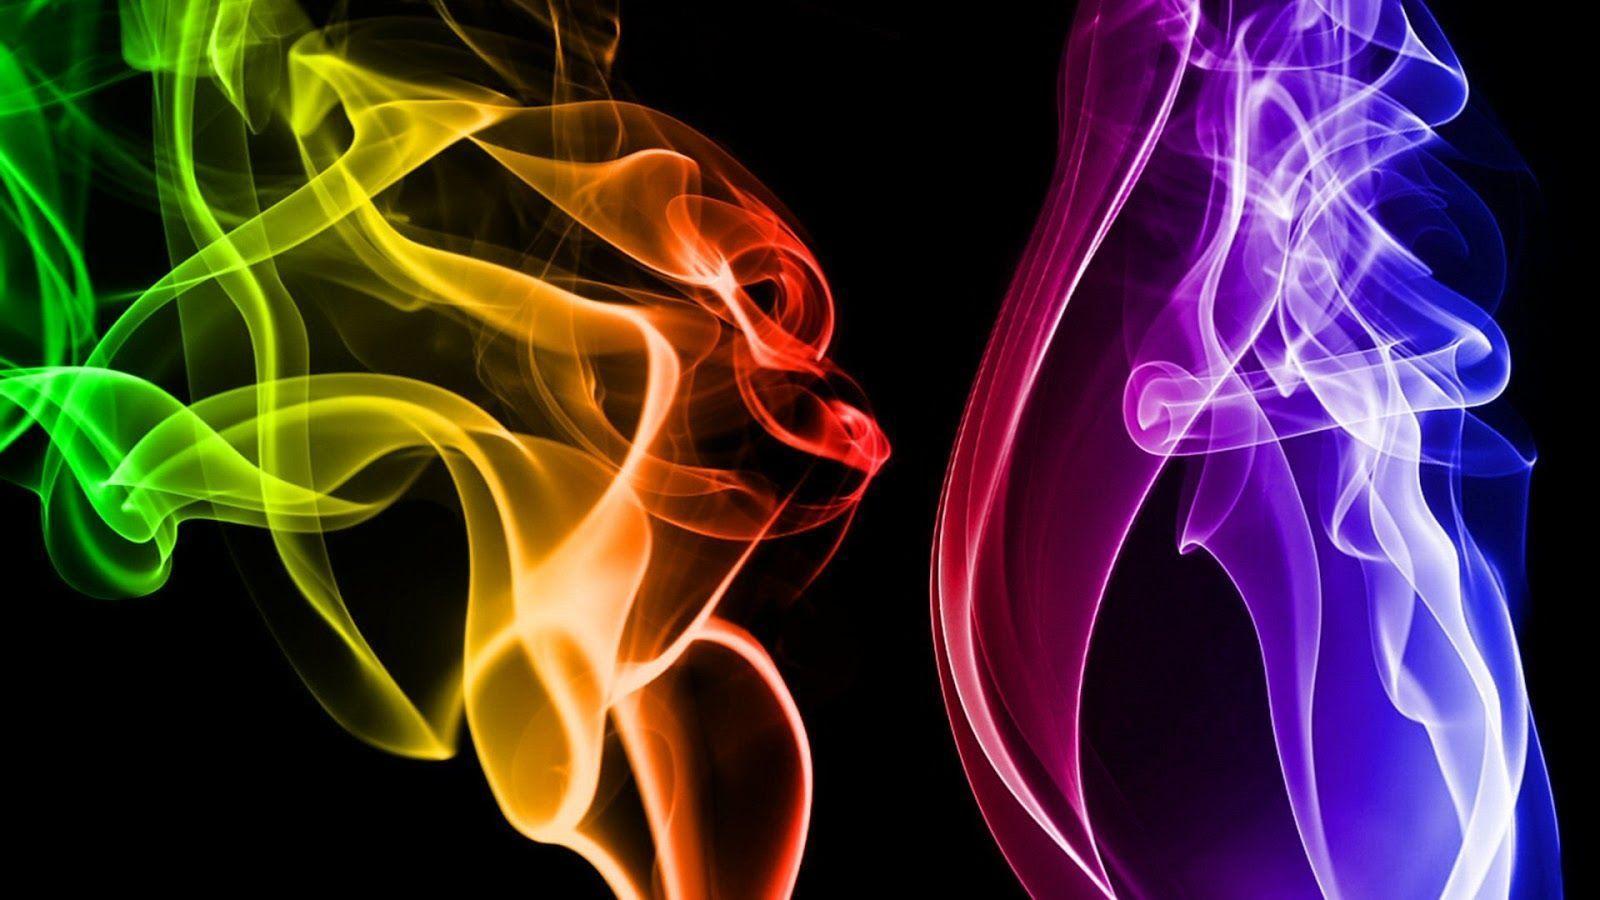 image For > Colored Smoke Tumblr Background